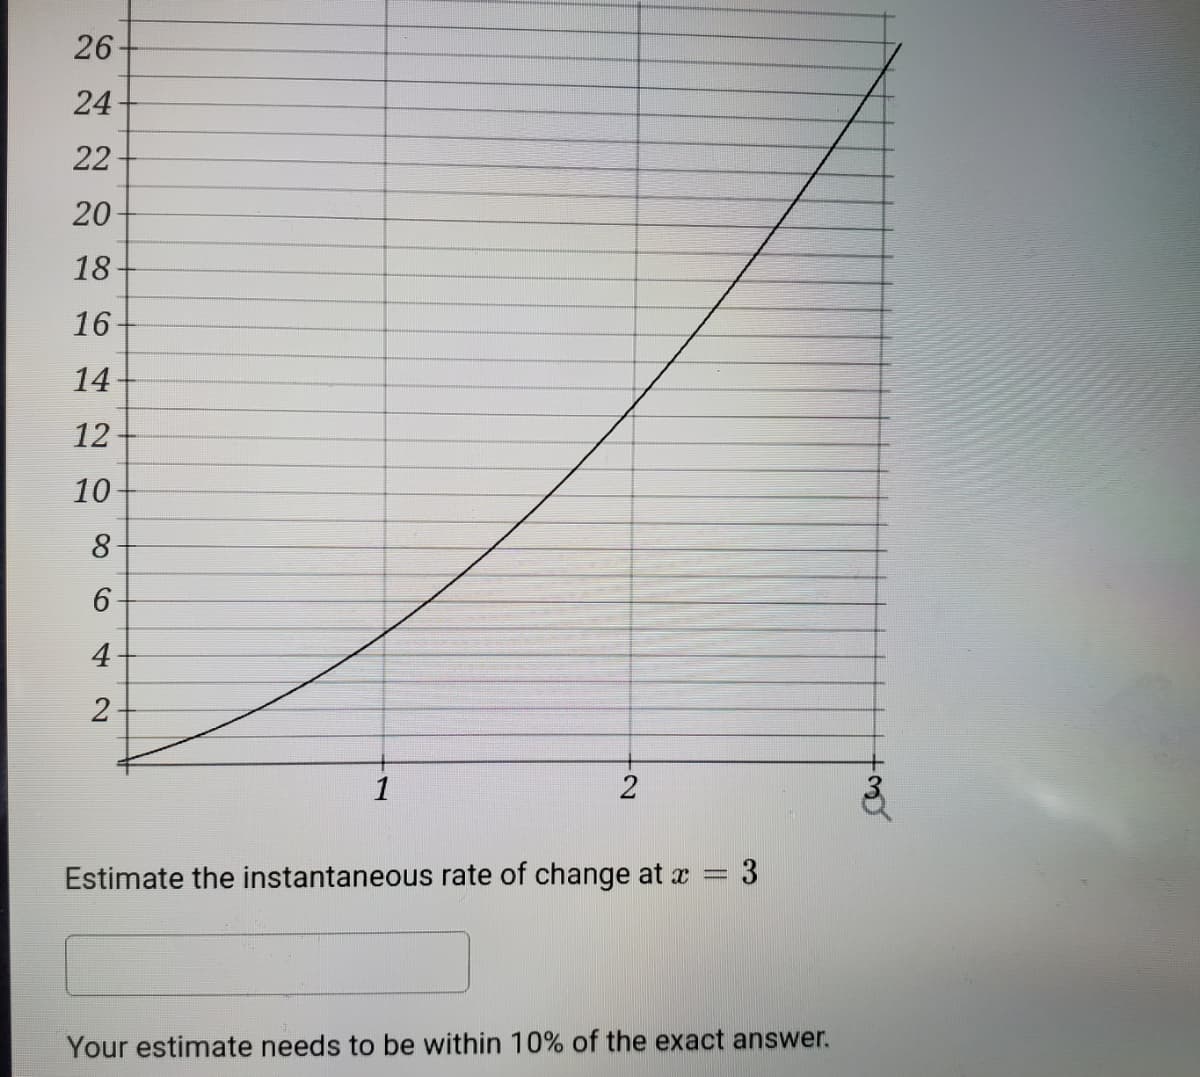 26
24
22
20
18
16
14
12
10
8
6.
4
2
1
Estimate the instantaneous rate of change at x = 3
Your estimate needs to be within 10% of the exact answer.
